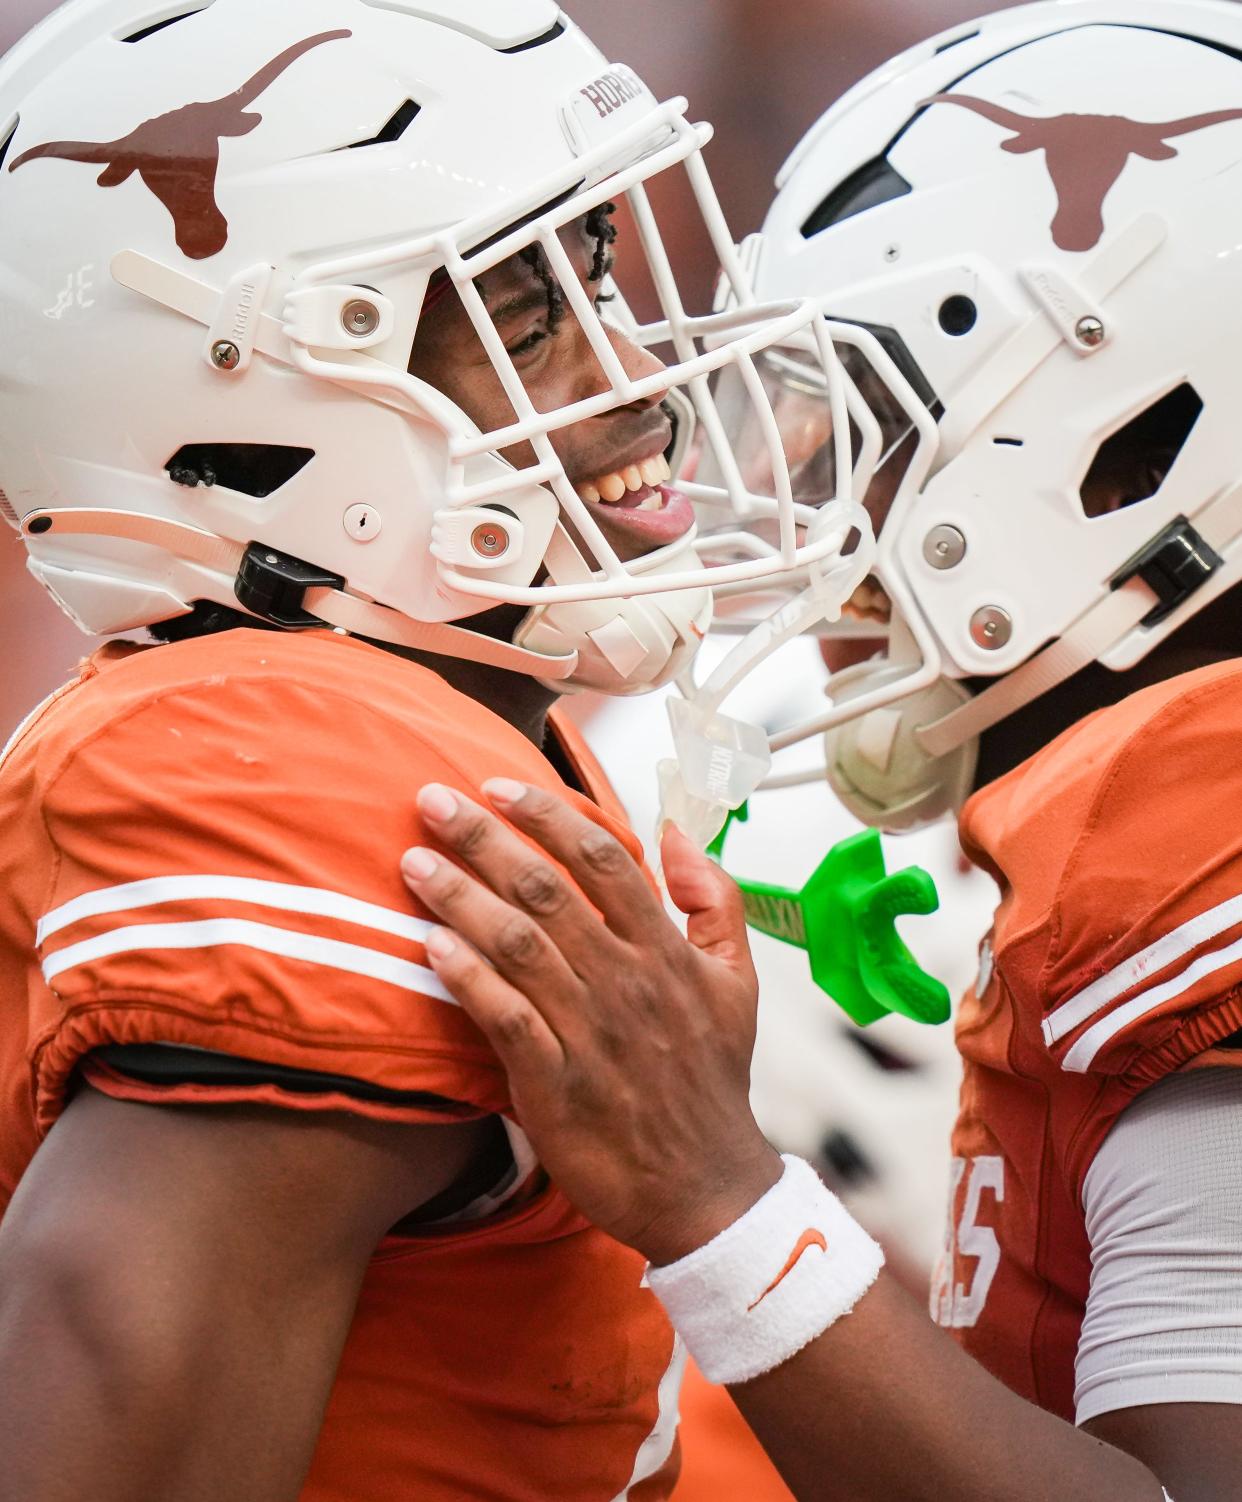 Texas wide receiver Ryan Wingo, left, celebrates a touchdown catch in the second quarter during Saturday's Orange-White spring game at Royal-Memorial Stadium. The annual scrimmage closed out the Longhorns' spring football workouts. The season opener is Aug. 31.